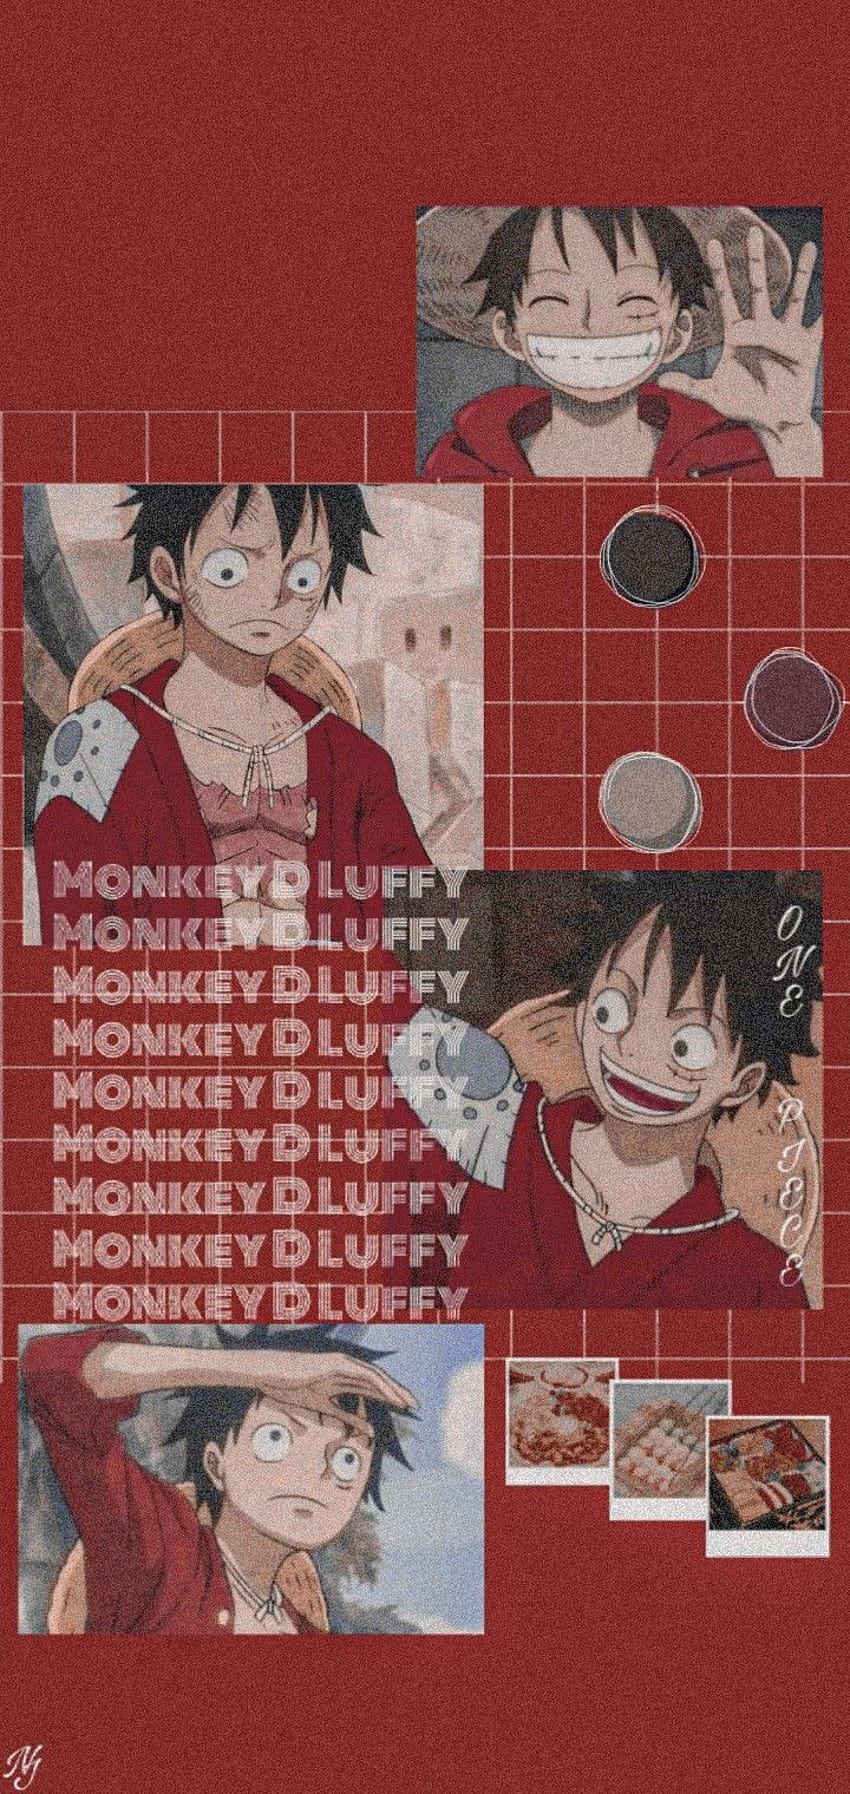 Aesthetic One Piece posted by Christopher Walker, one piece red aesthetic HD phone wallpaper